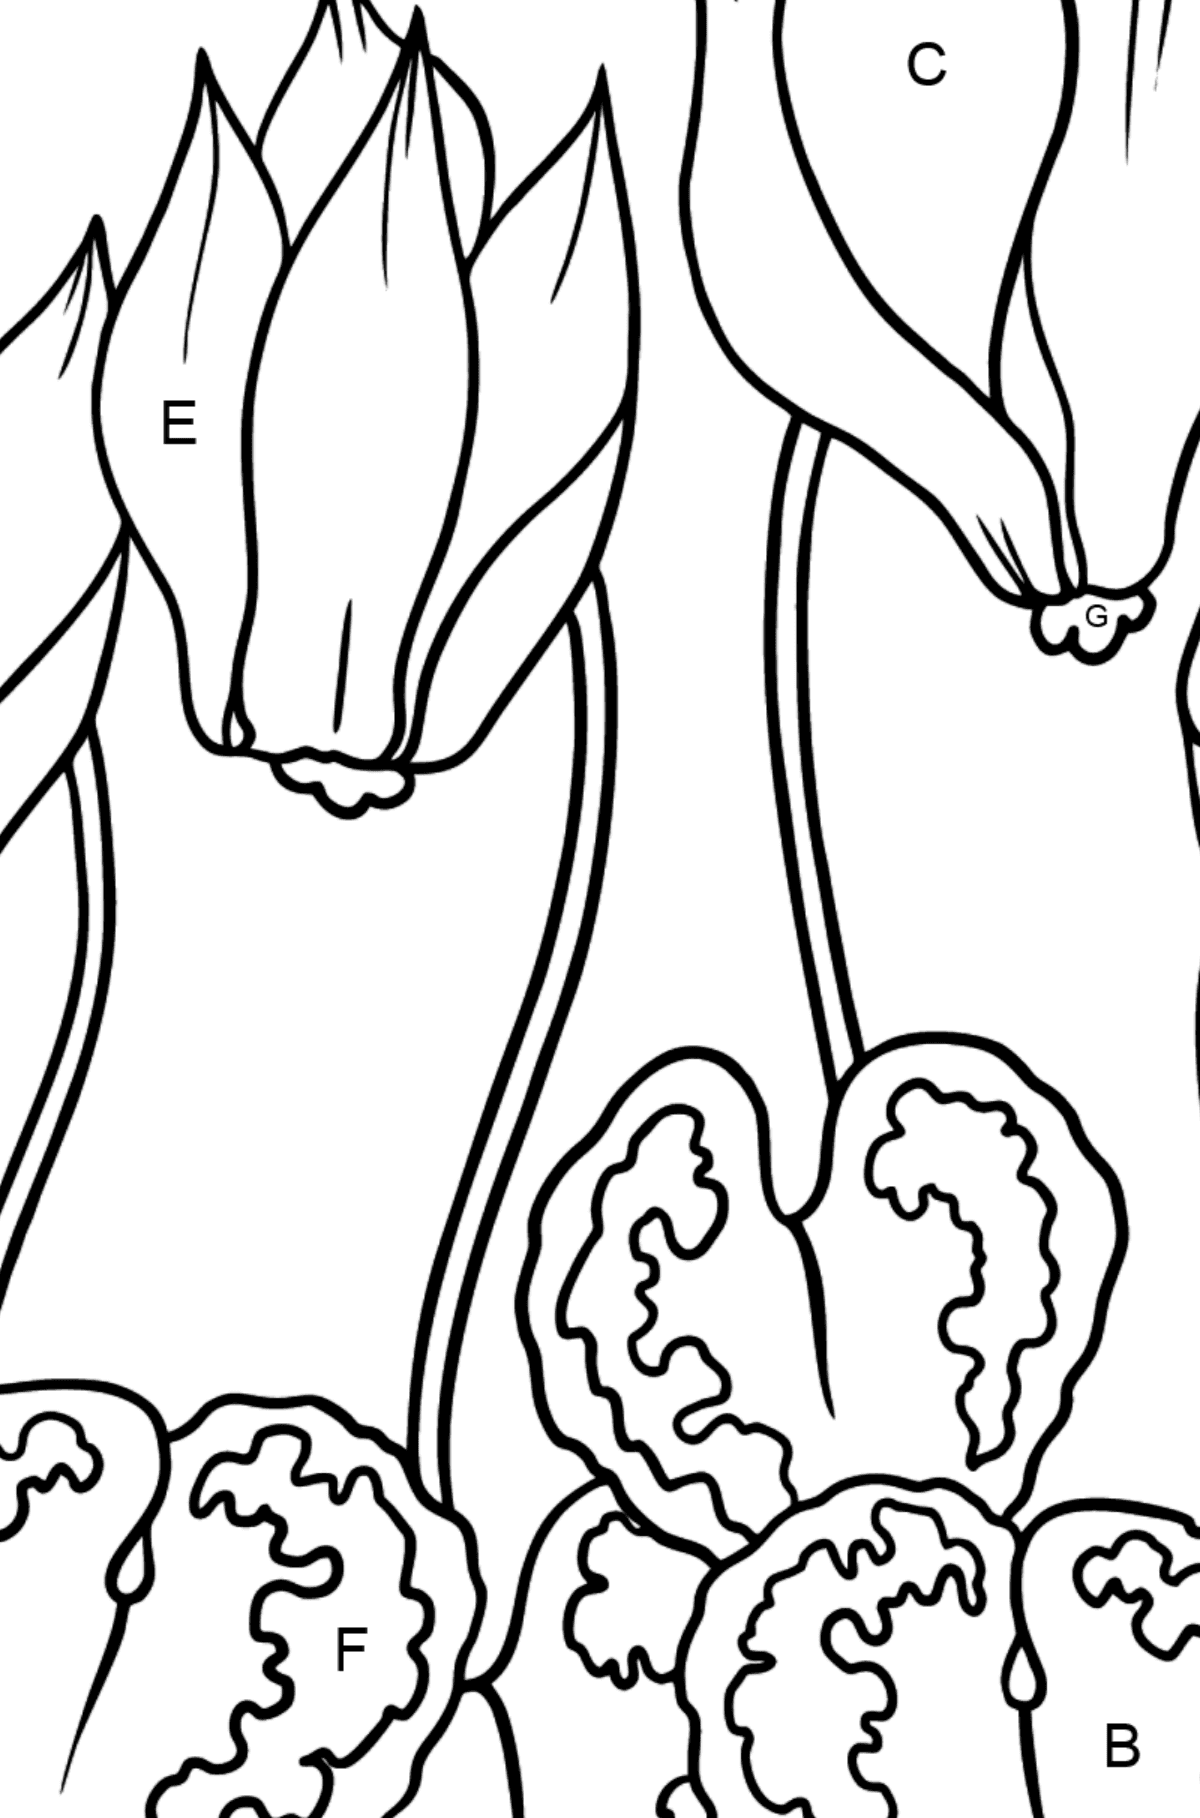 Coloring Page Red and Pink Cyclamen - Coloring by Letters for Kids